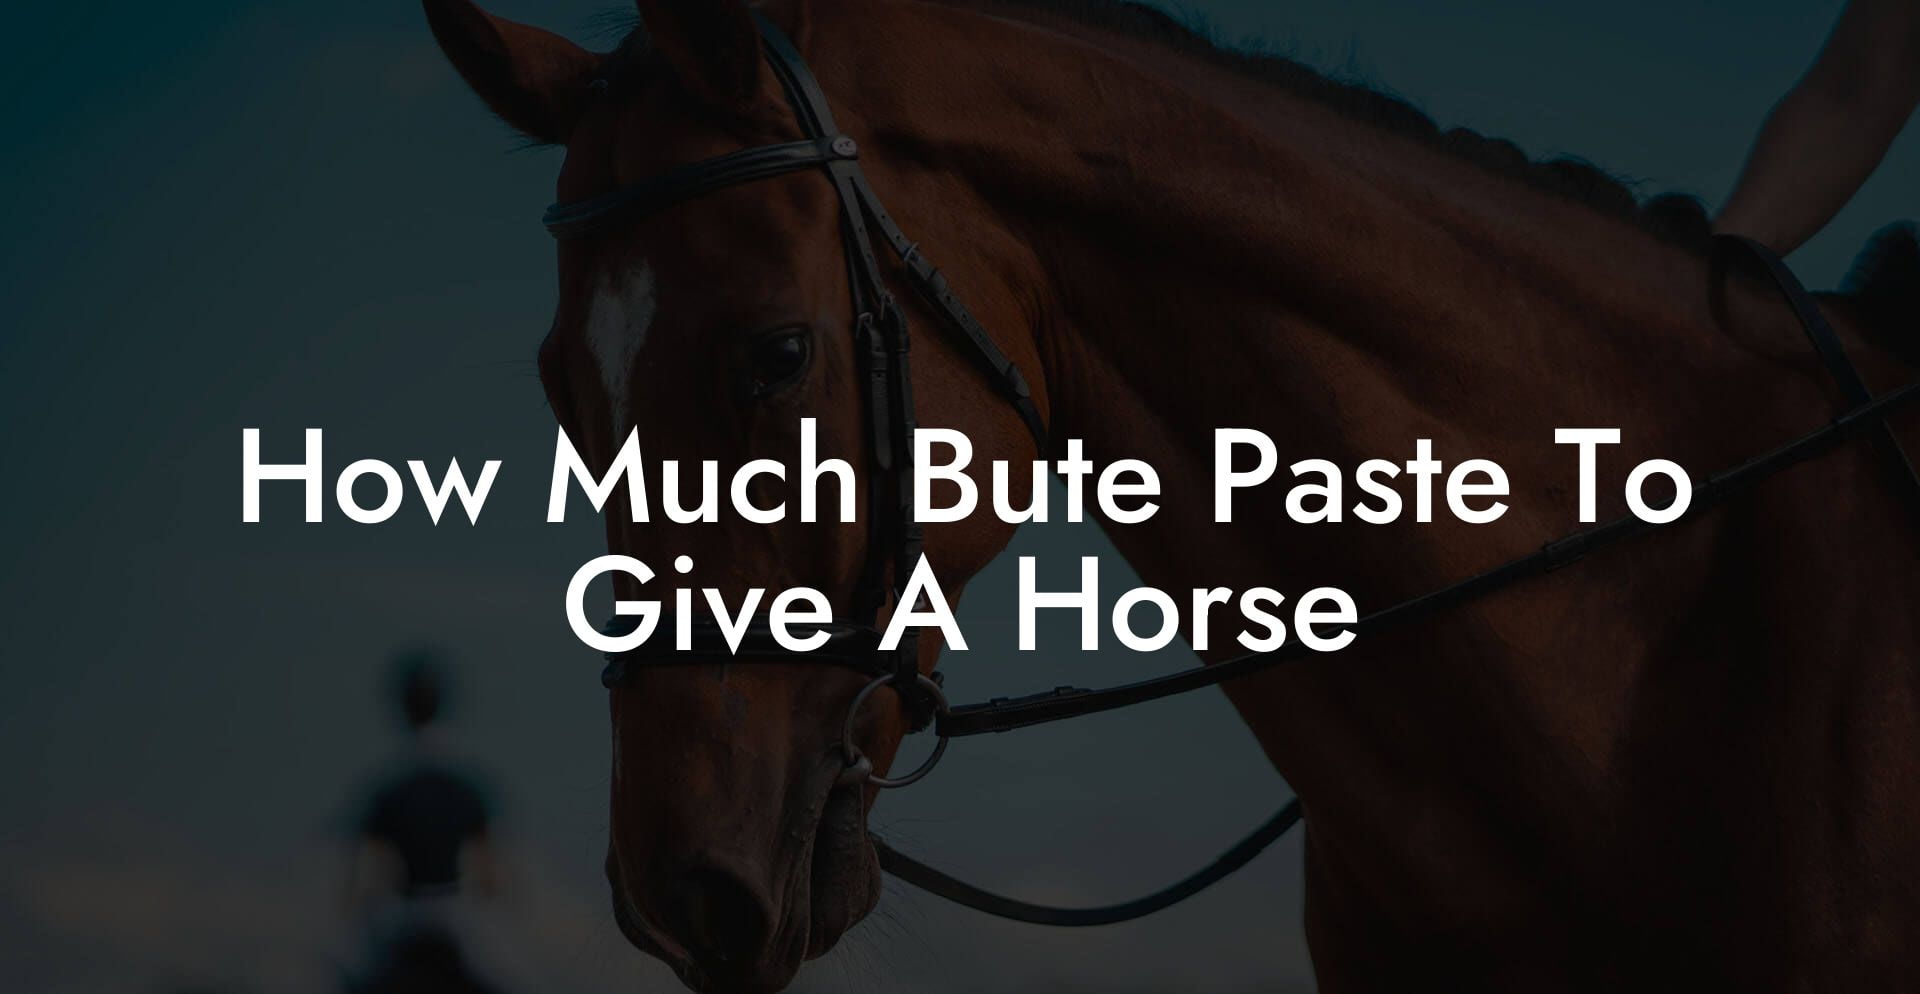 How Much Bute Paste To Give A Horse